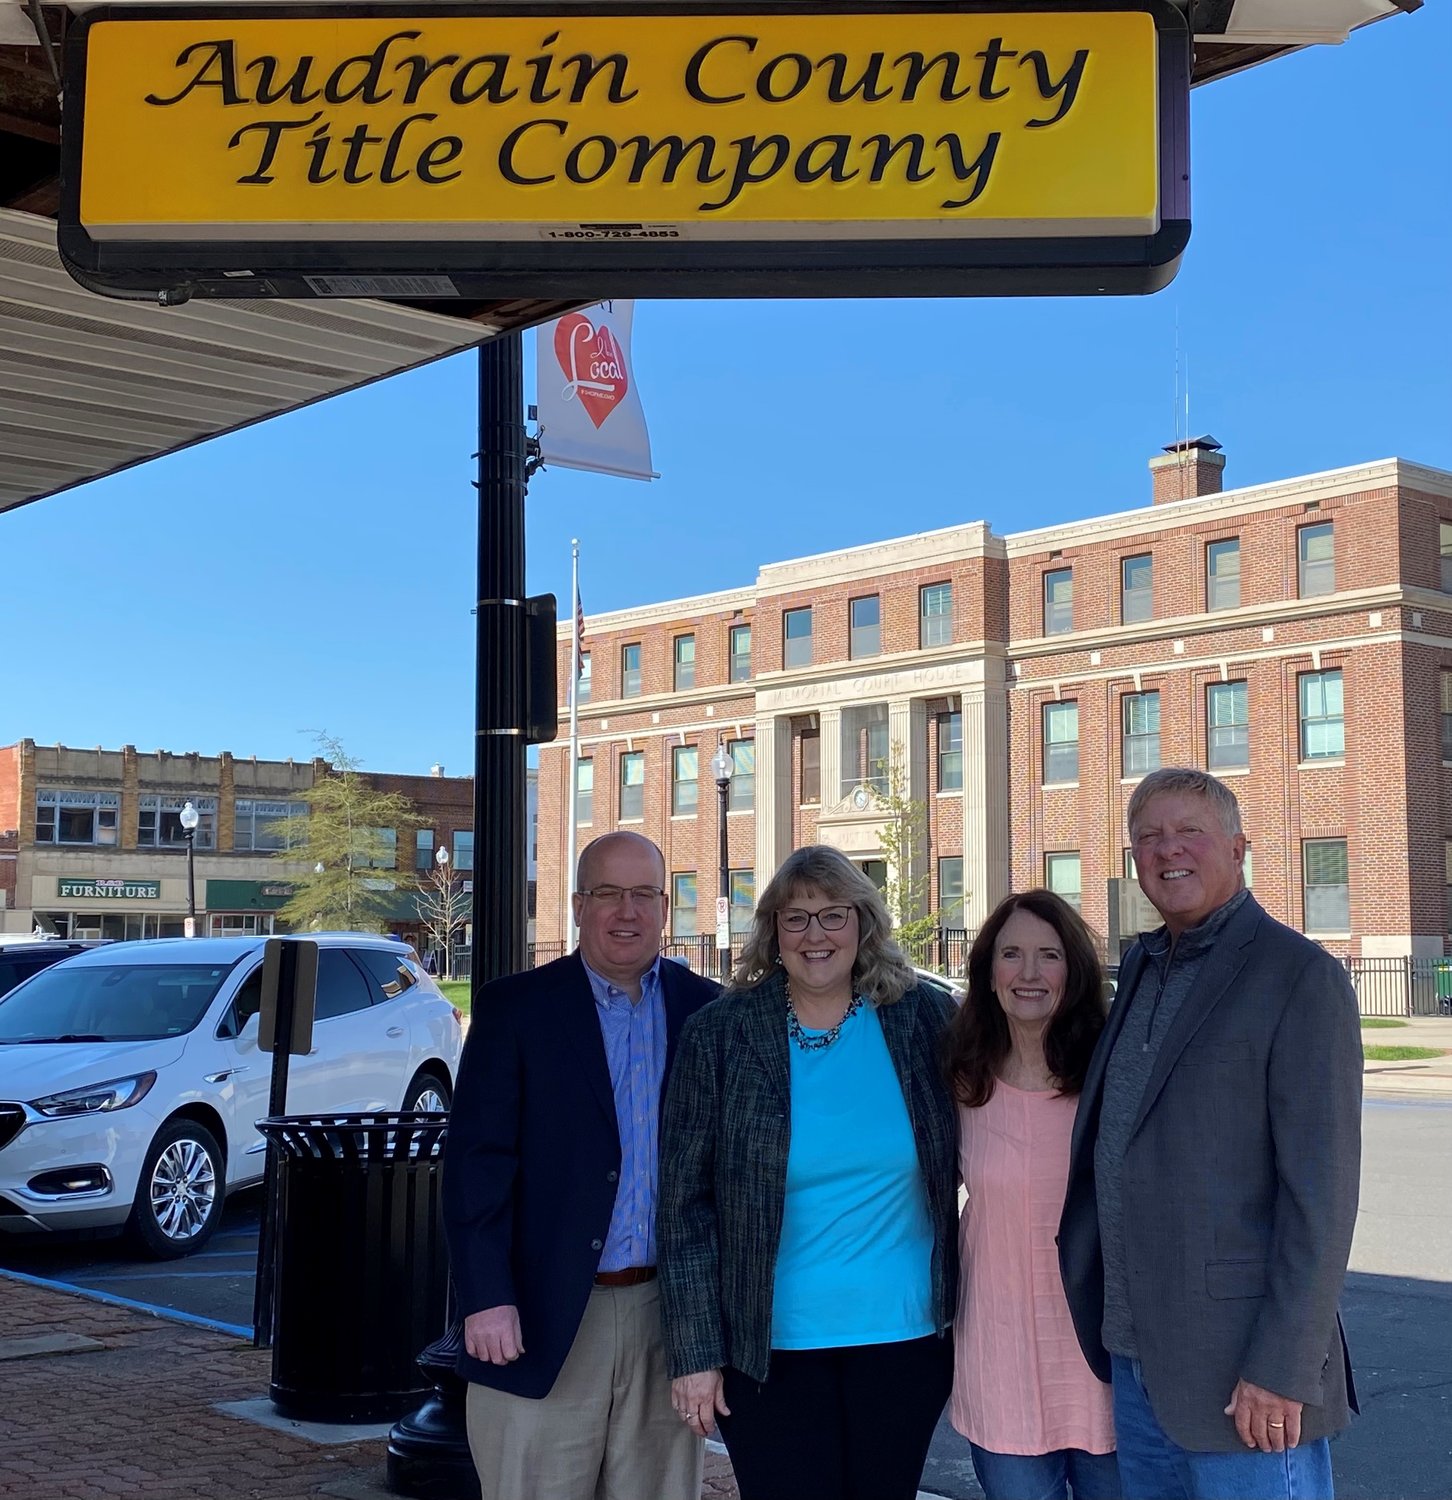 The Audrain County Title Company team: From left, Randy Owings, Stephanie Owings, Cheryl Erdel and Dan Erdel. [Submitted Photo]